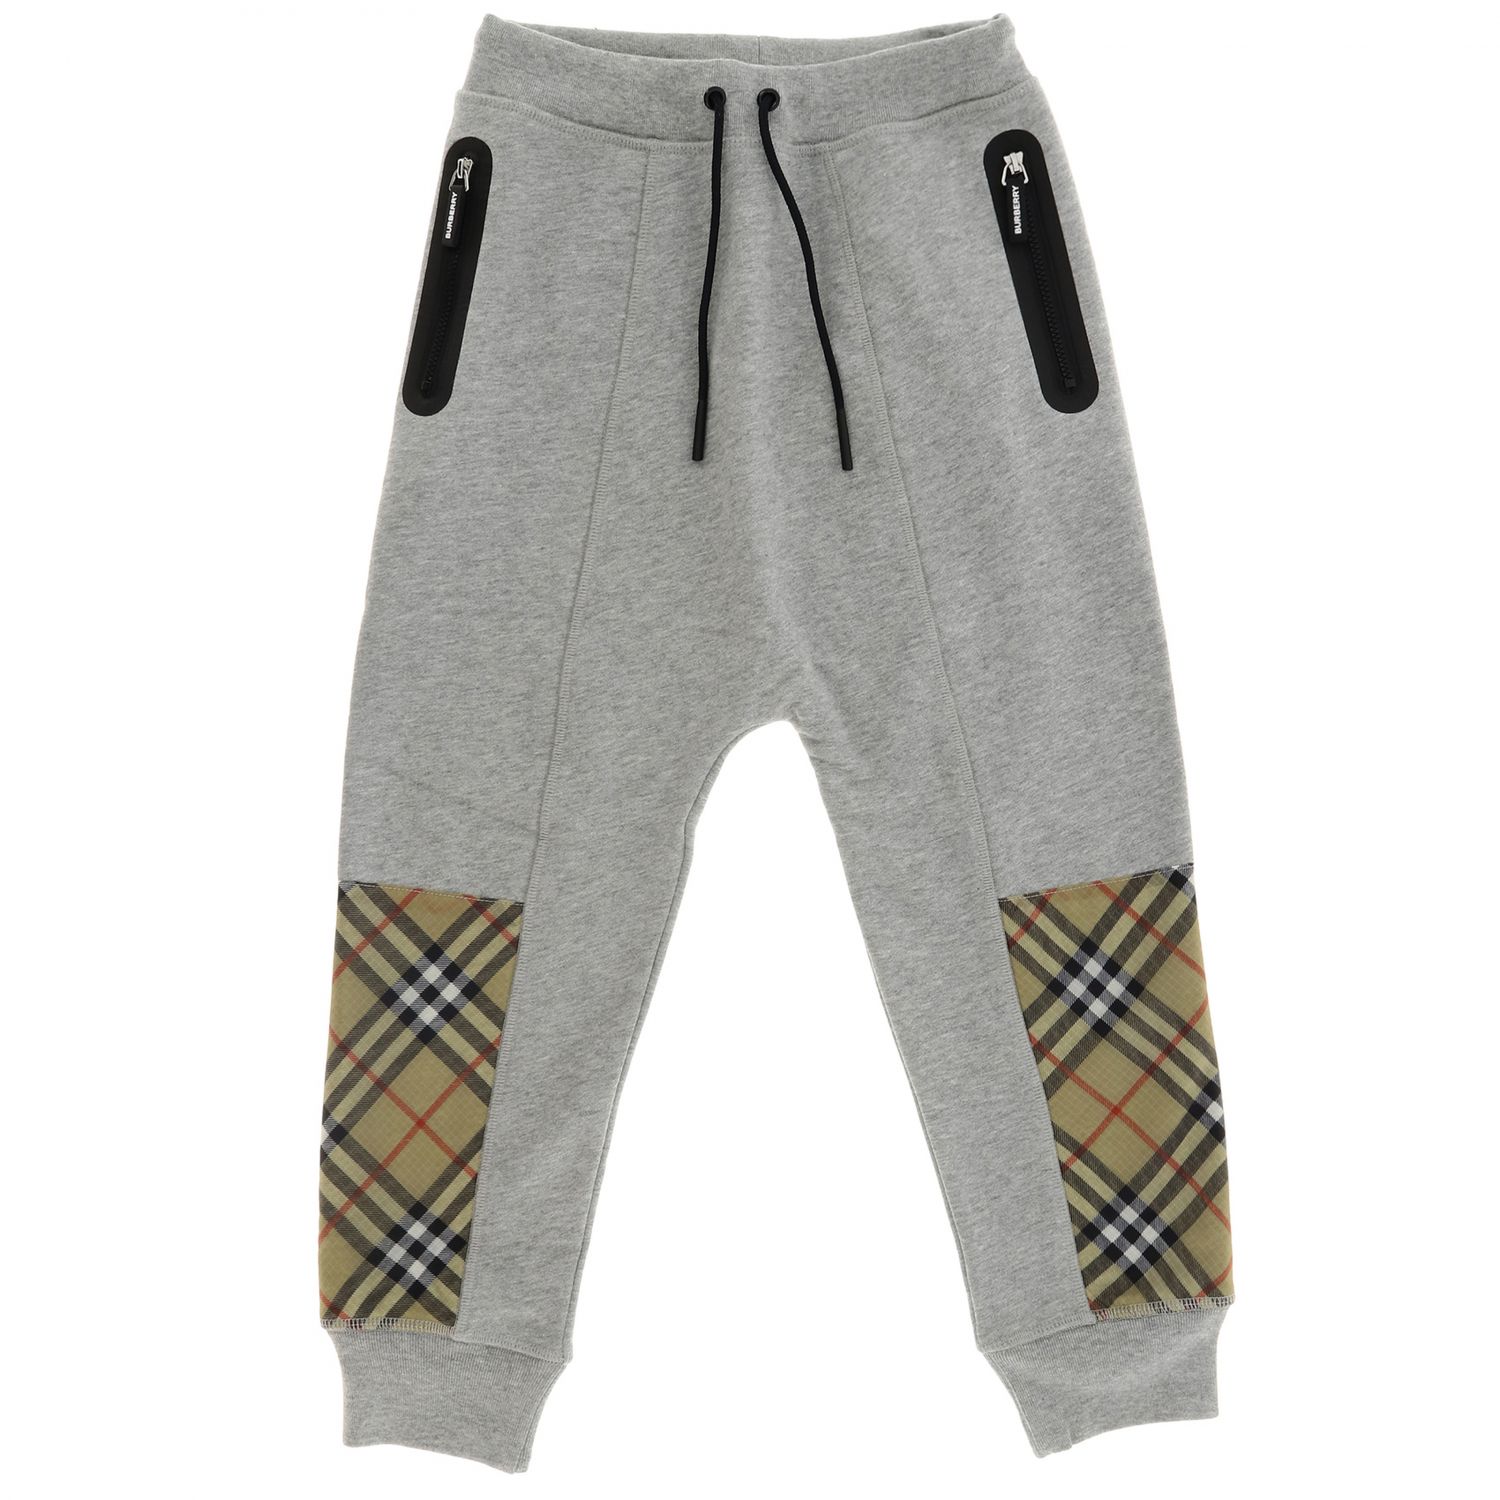 Burberry Outlet: Jogging trousers with check patches - Grey | Burberry  pants 8017382 online on 